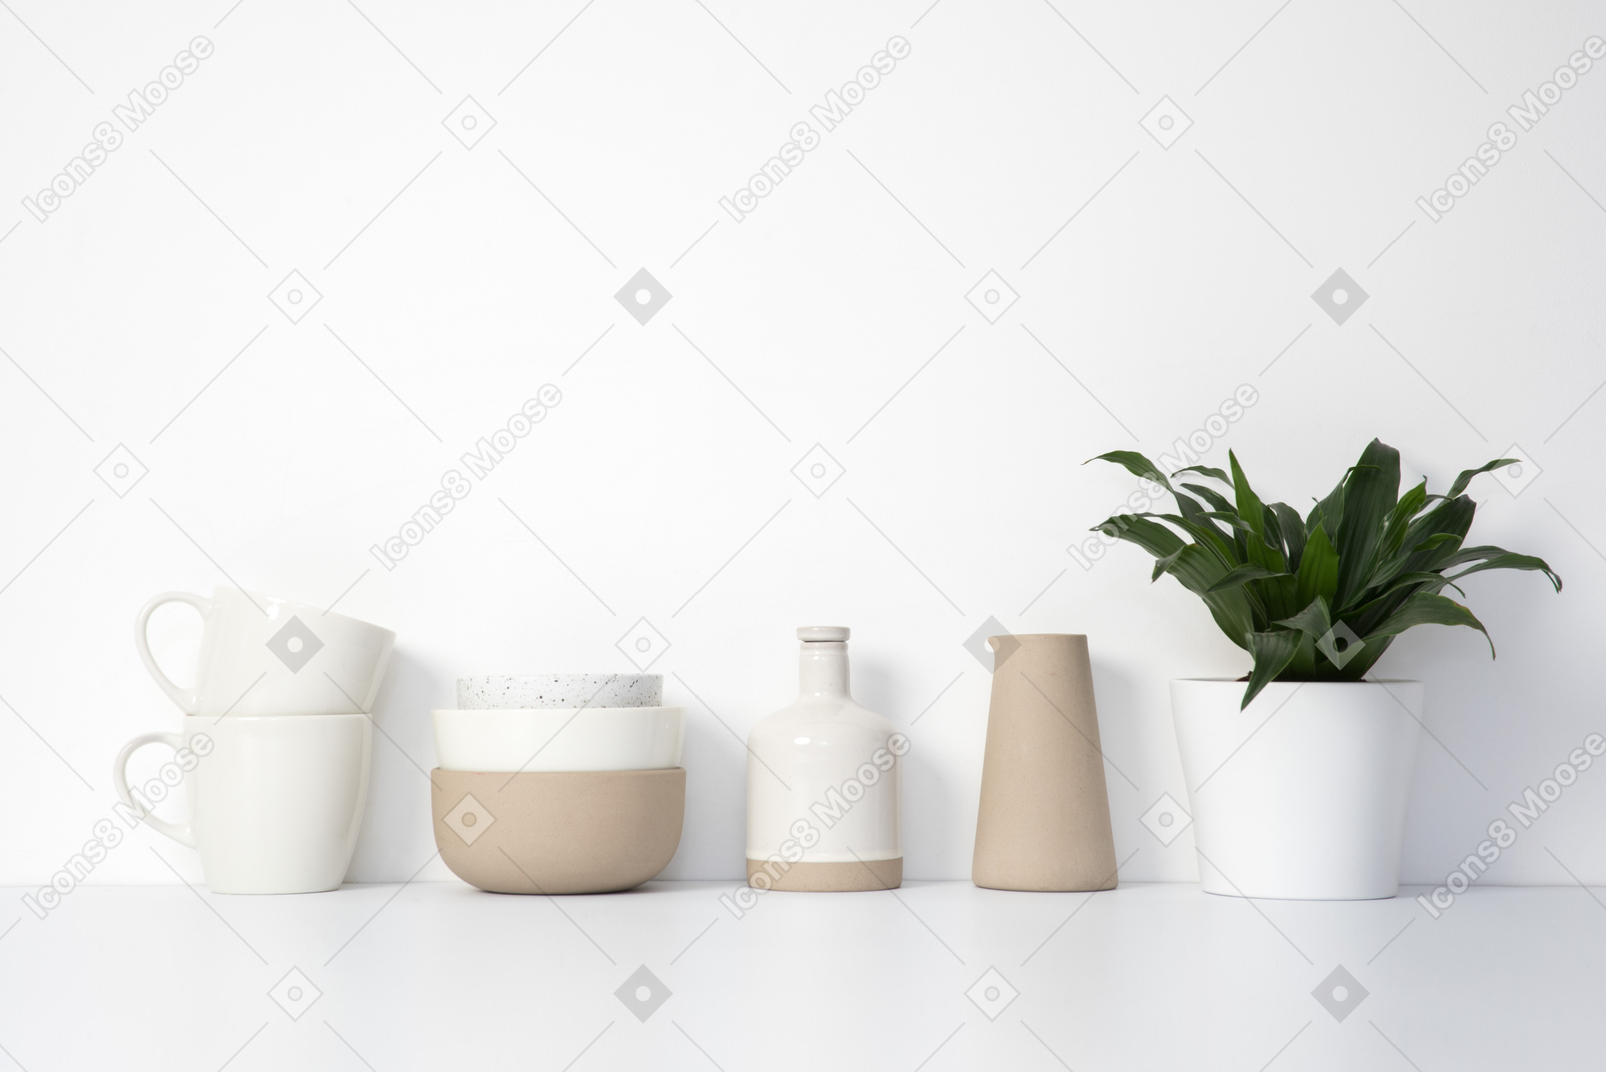 Ceramic kitchenware and house plant